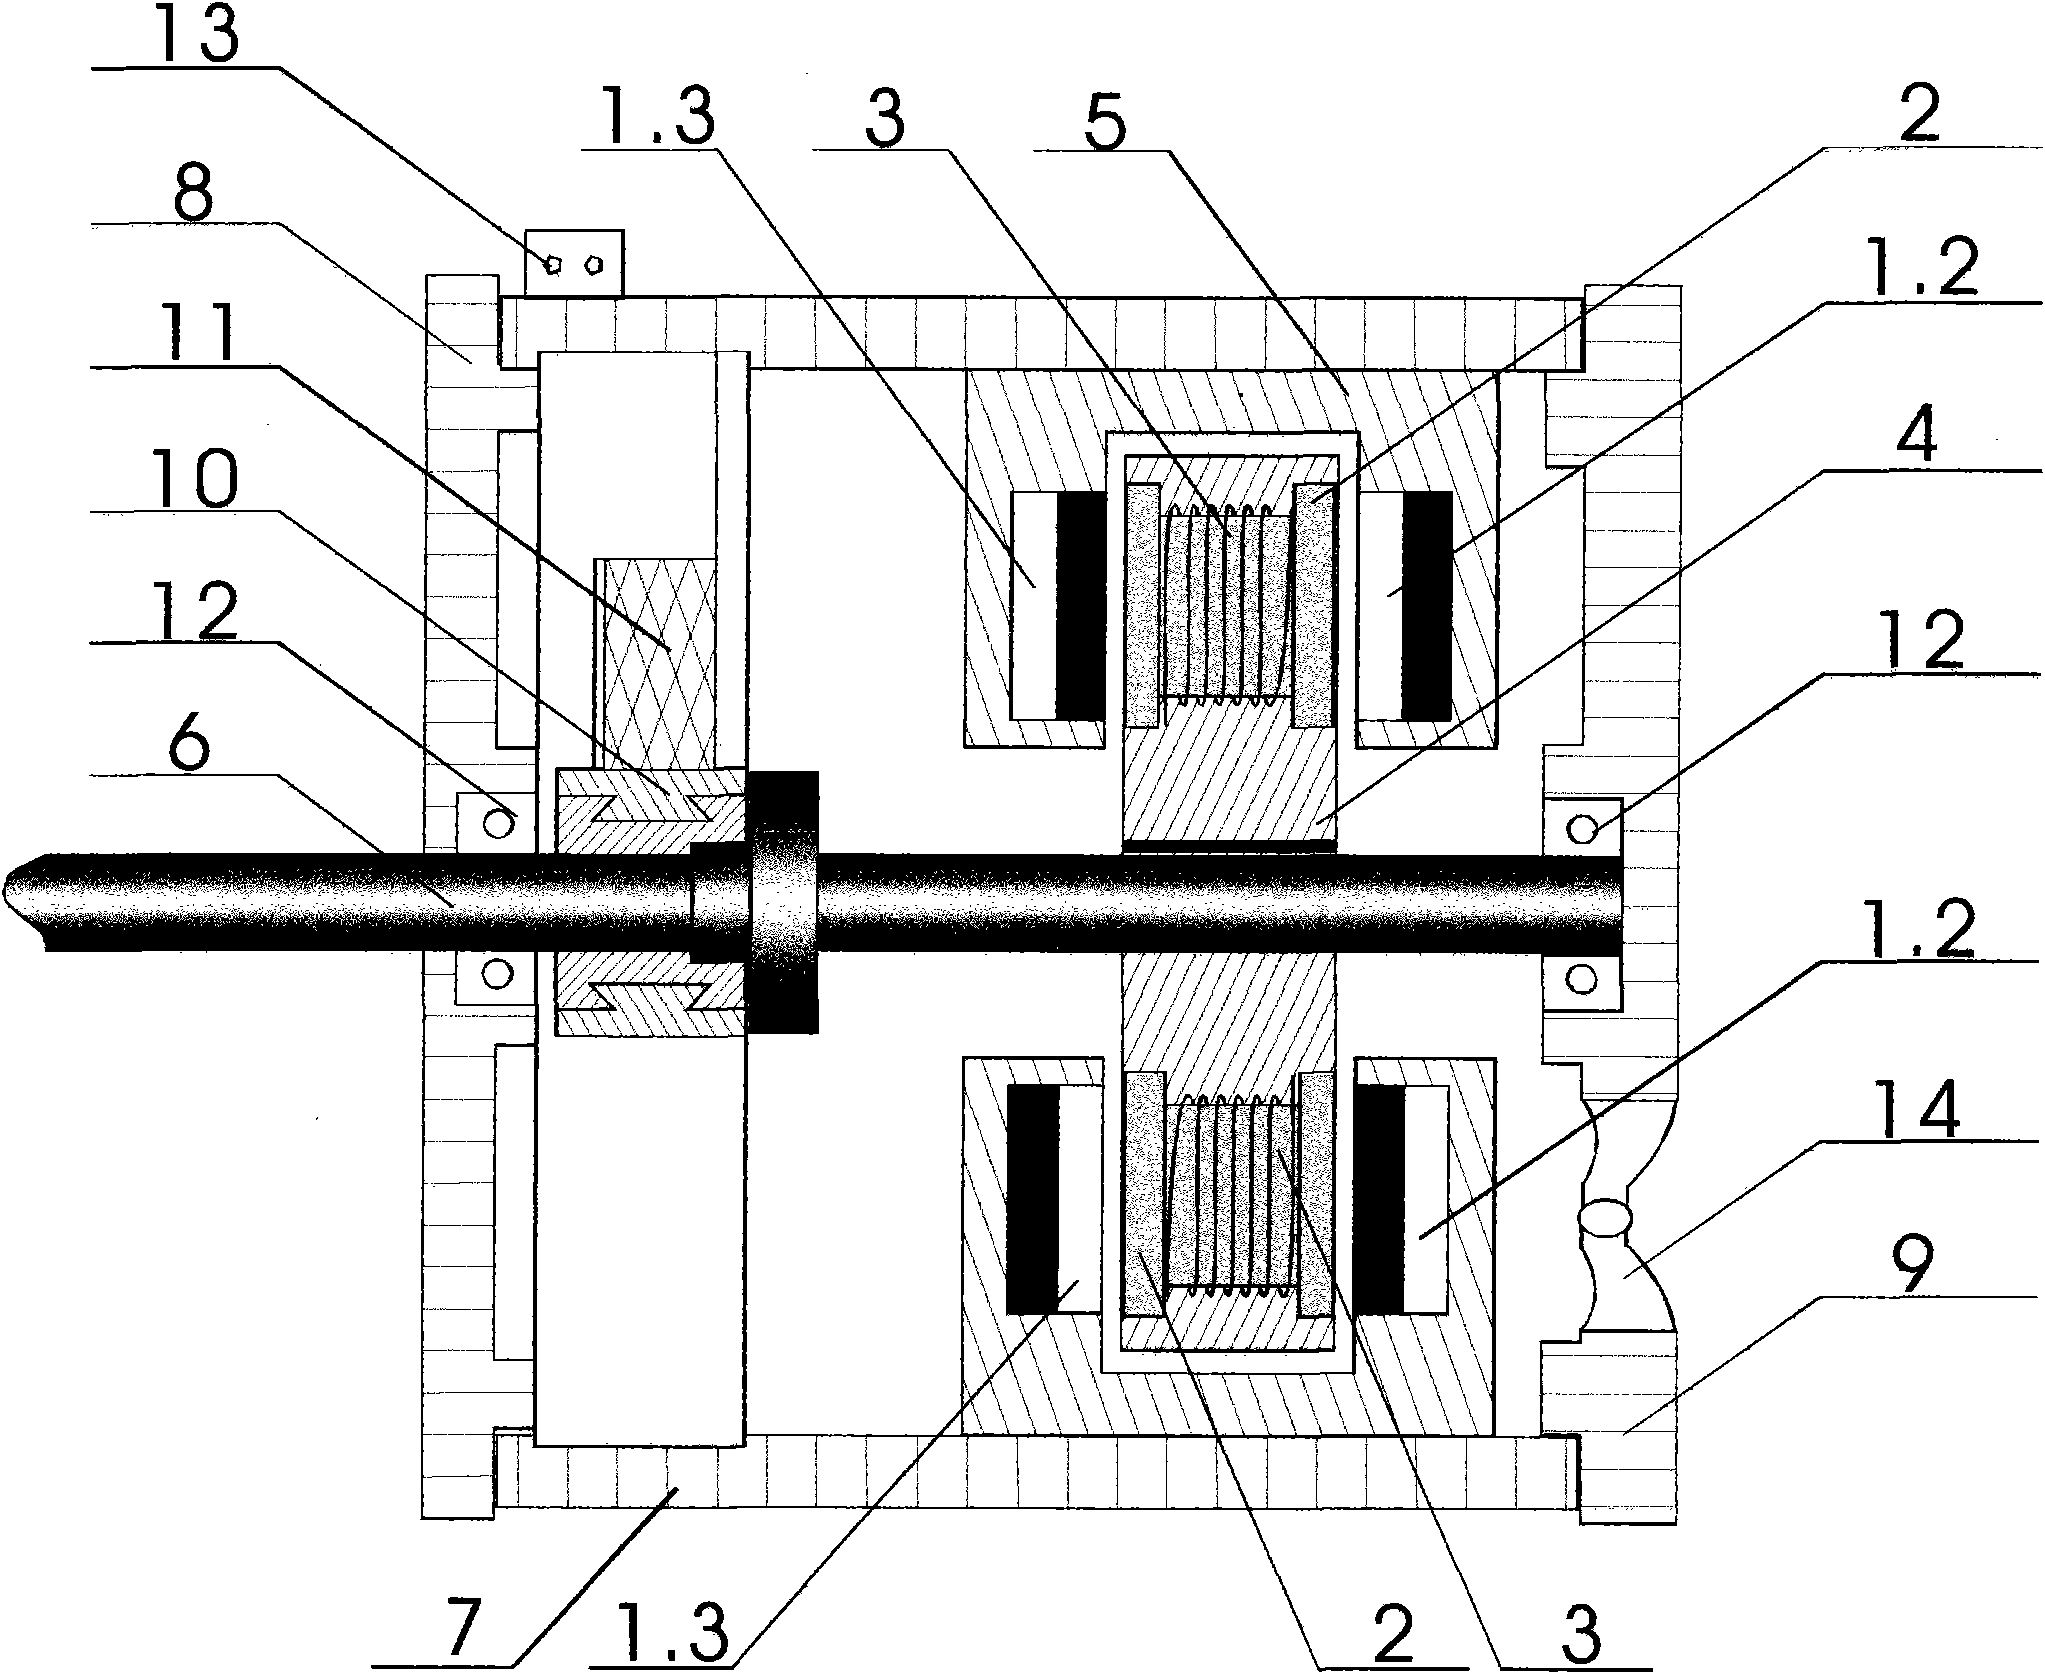 Mixed-excitation high-efficiency motor based on Halbach array